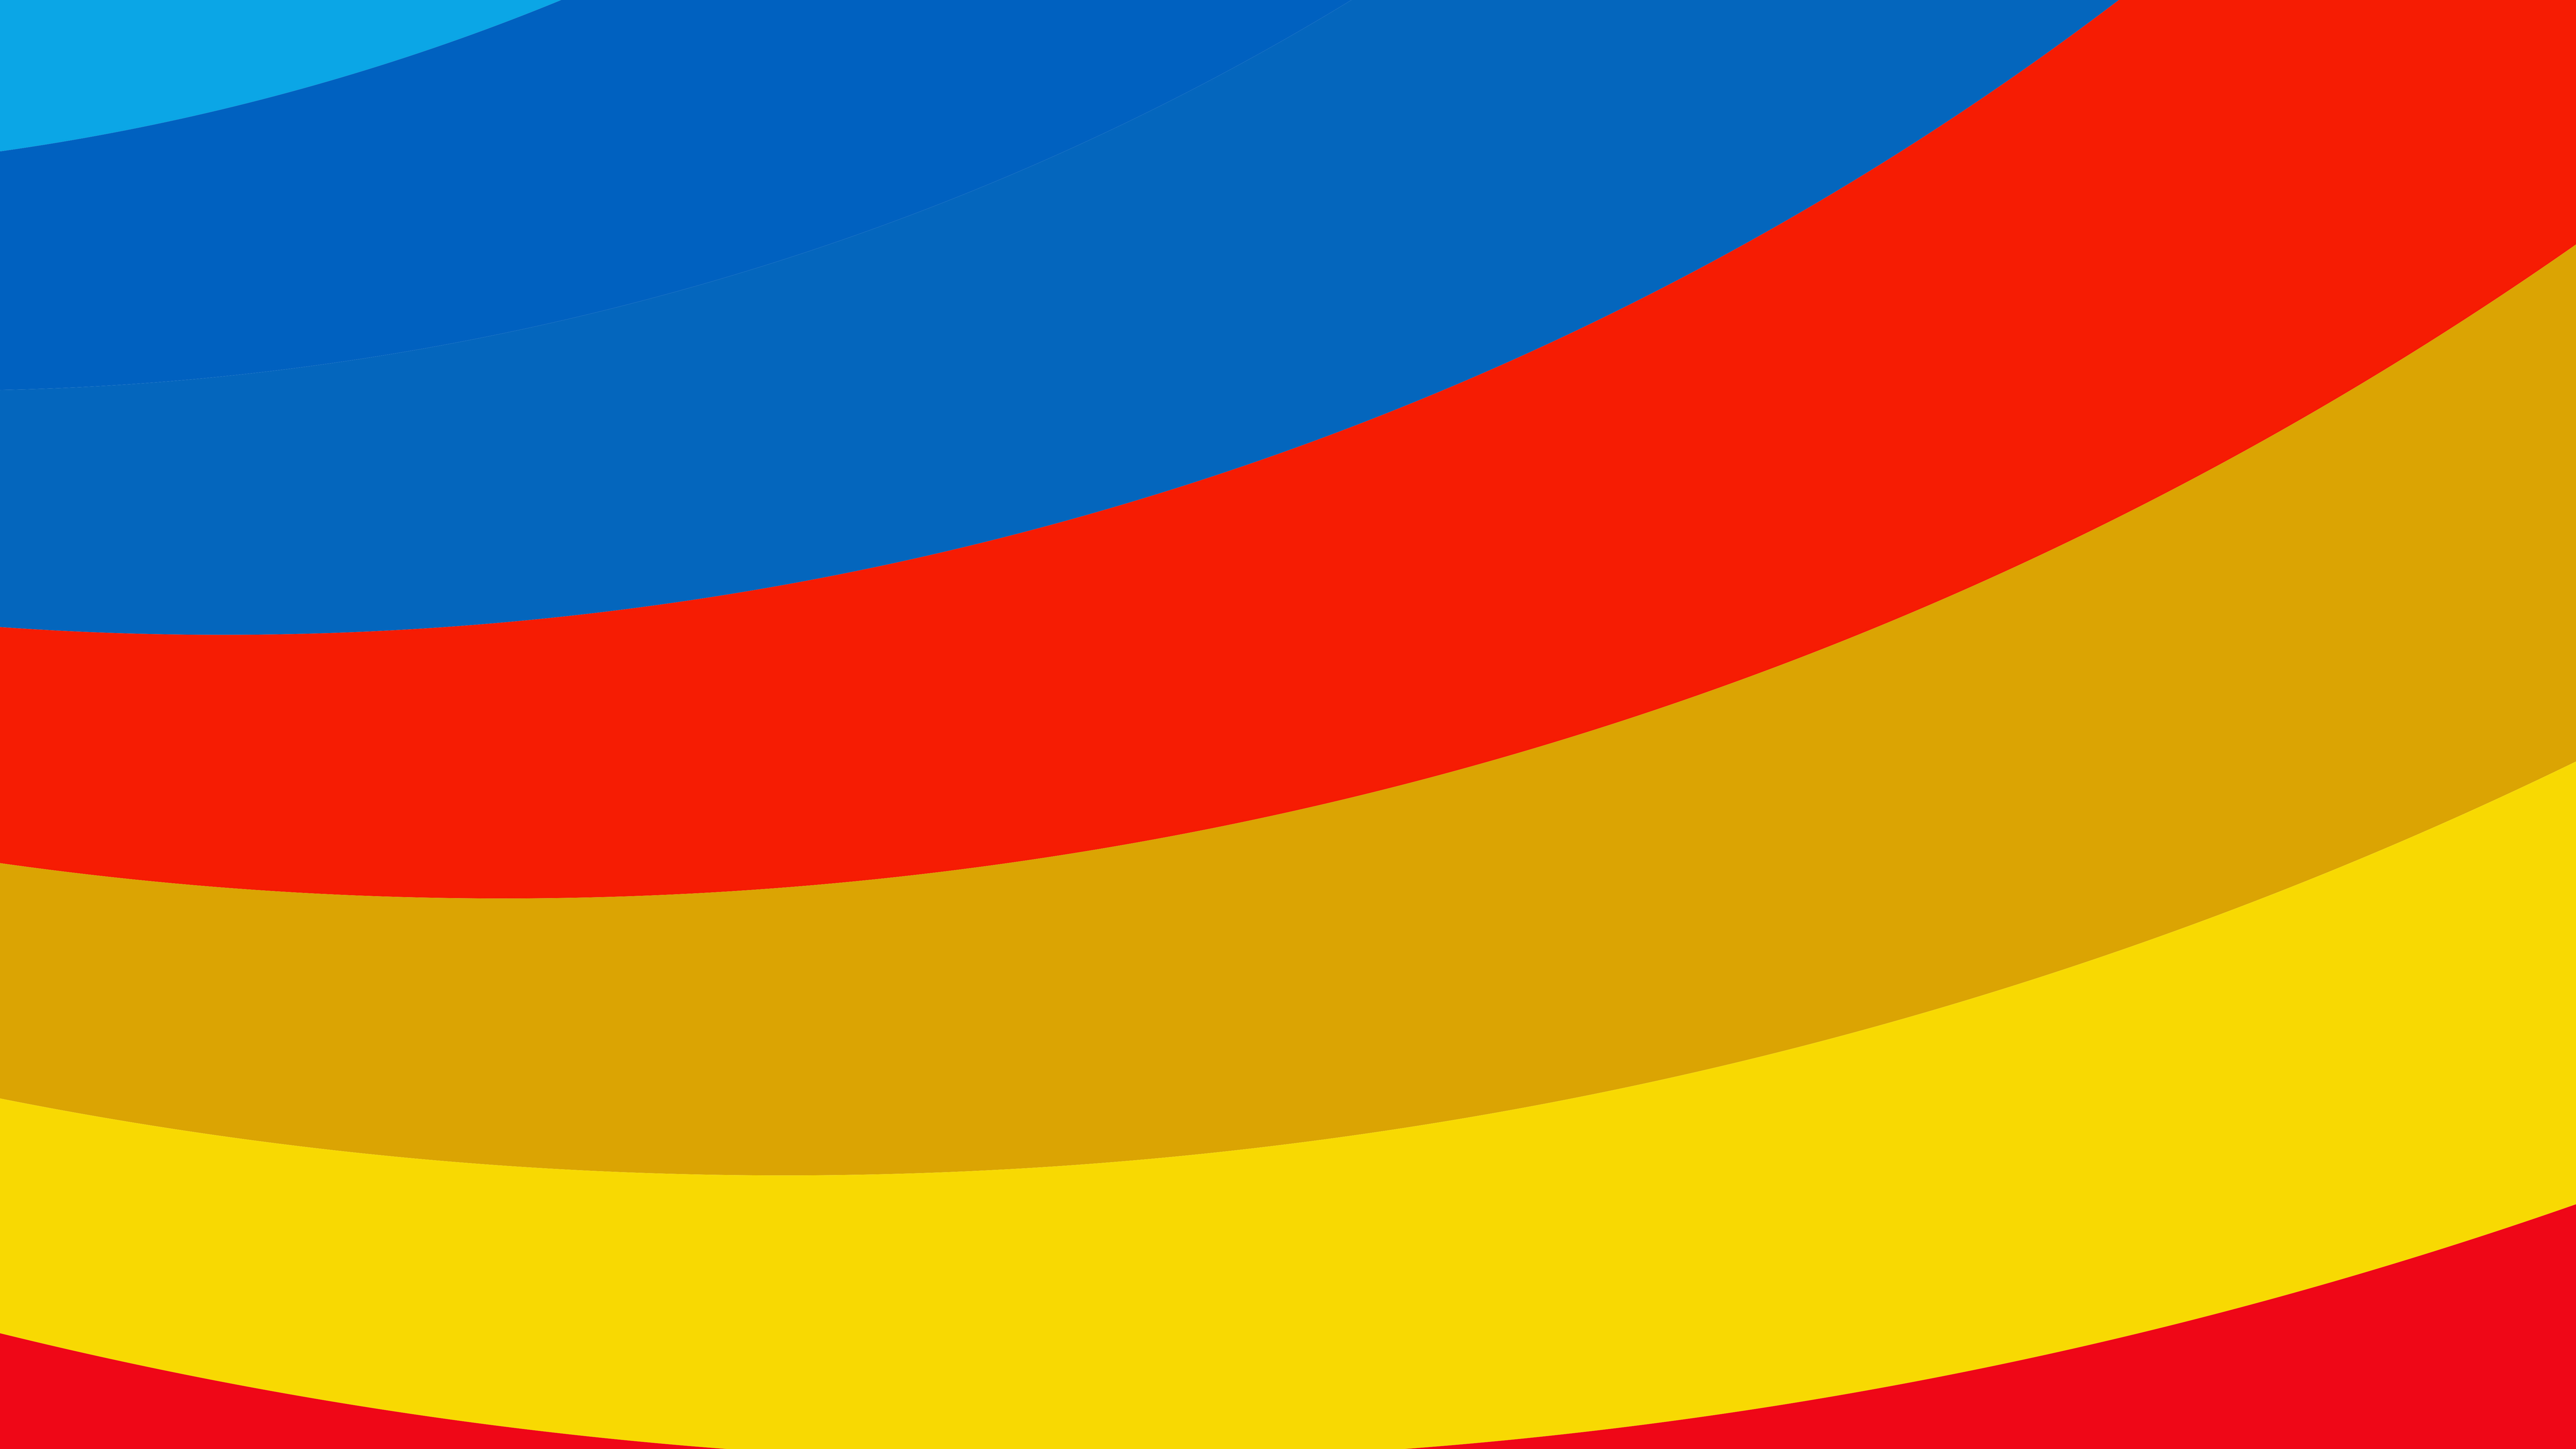 Free Red Yellow and Blue Curved Stripes Background Image